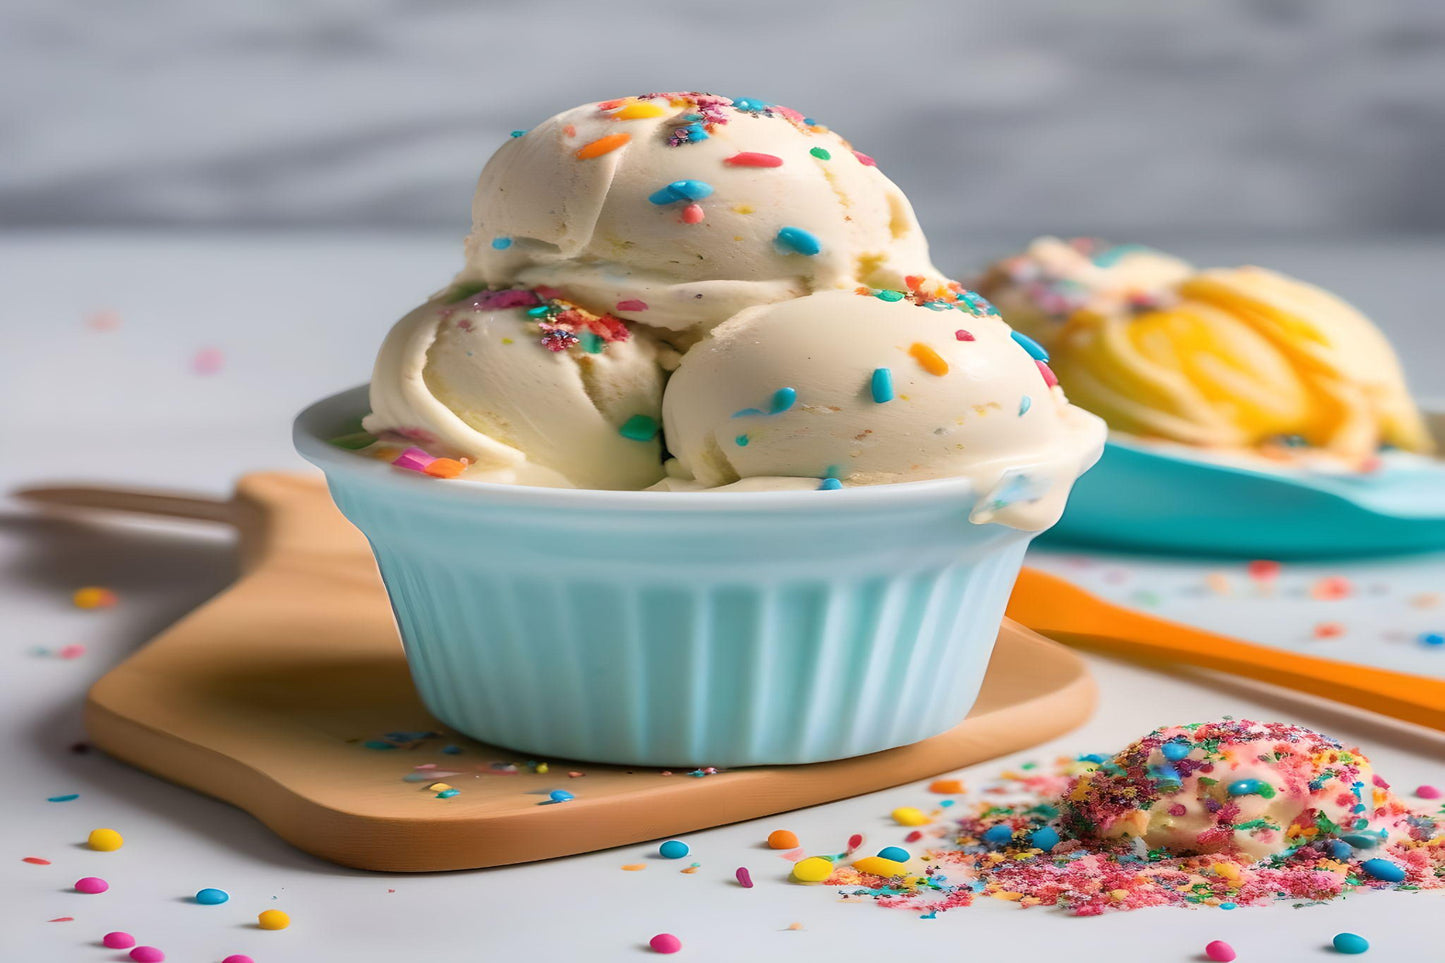 CAKE BATTER ICE CREAM - This creamy vanilla ice cream with hints of almond and sugar cane, along with luscious swirls of cake batter make this rich dessert a truly delectable treat. Treat yourself to a playful twist on traditional ice cream flavors!  Available in Perfume Oil, Body Spray, Body Oil